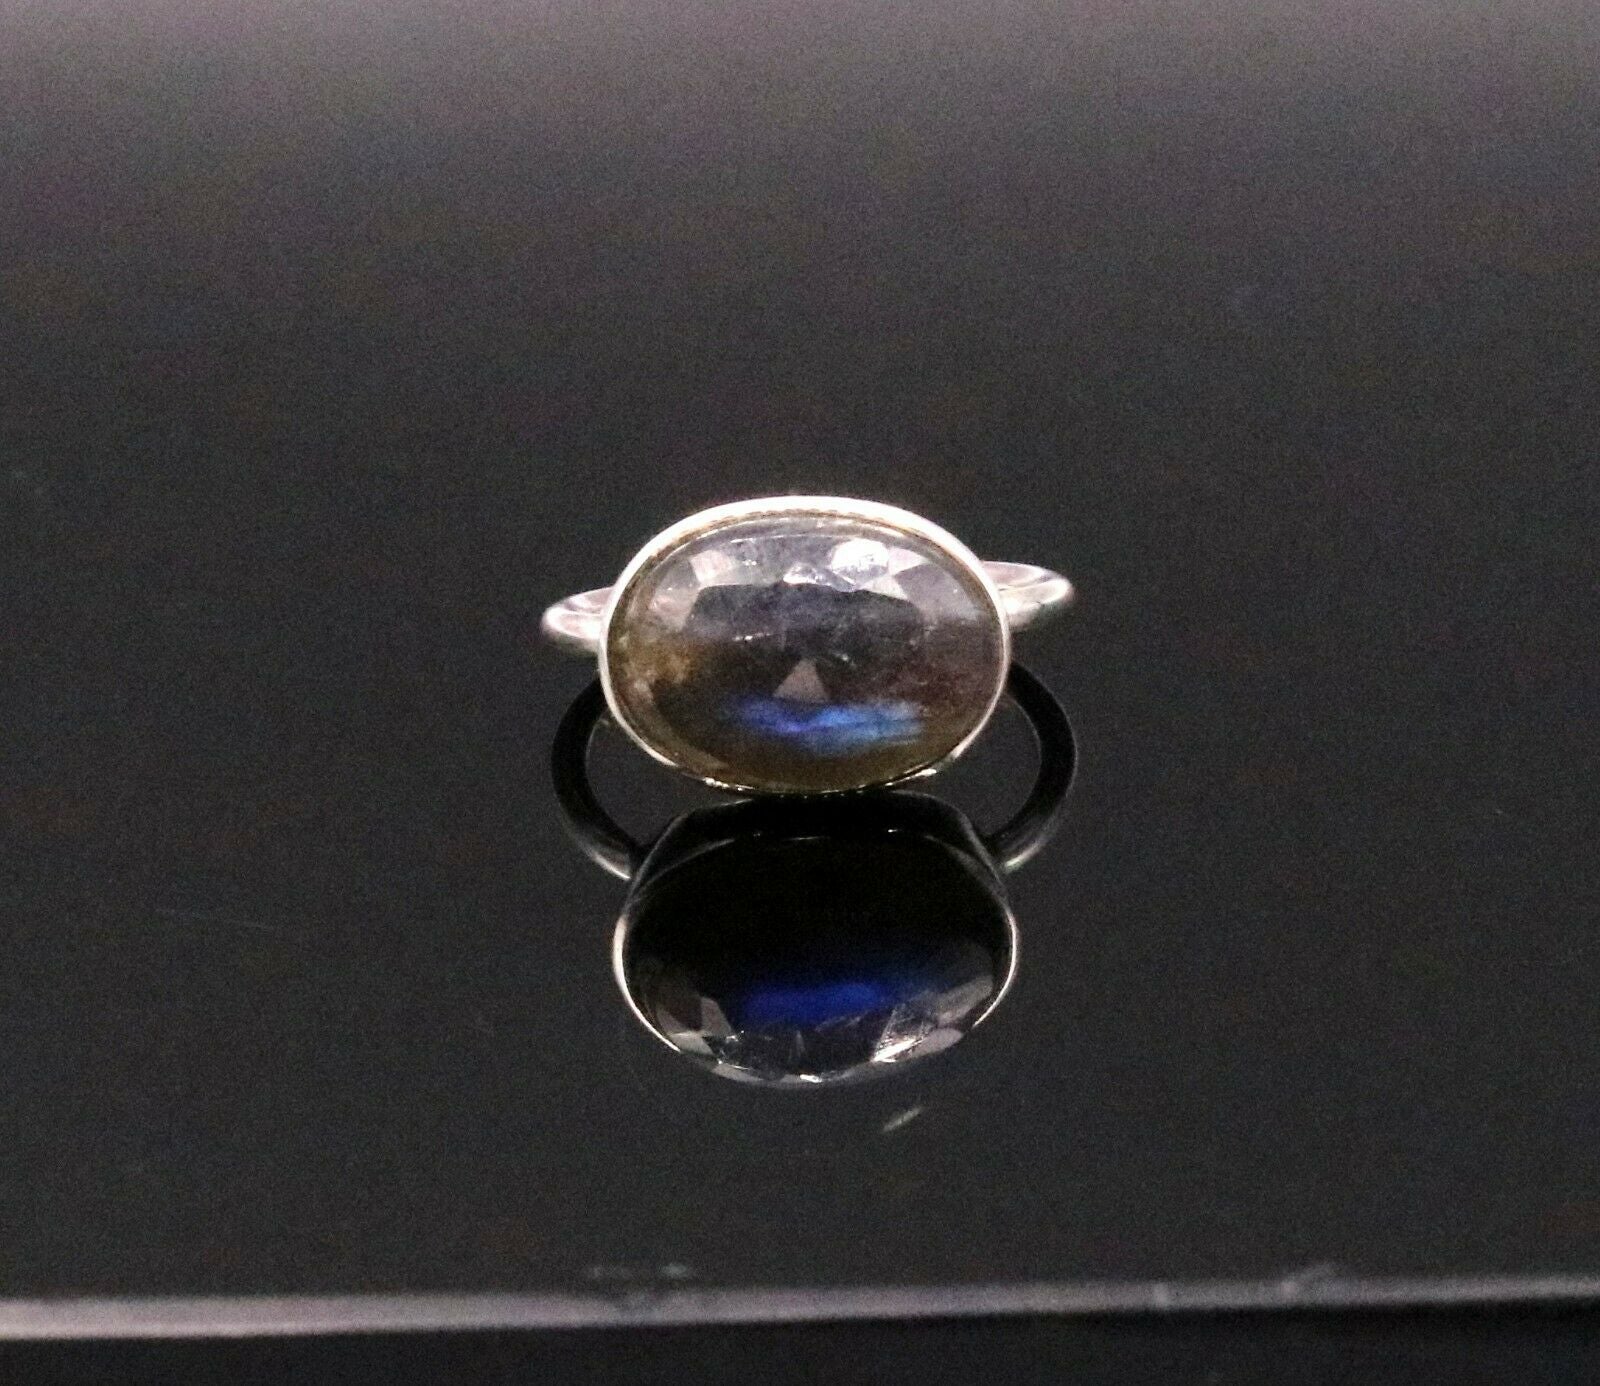 EXCELLENT BLUE FIRE LABRADORITE STONE 925 SOLID SILVER RING UNISEX BAND sr152 - TRIBAL ORNAMENTS